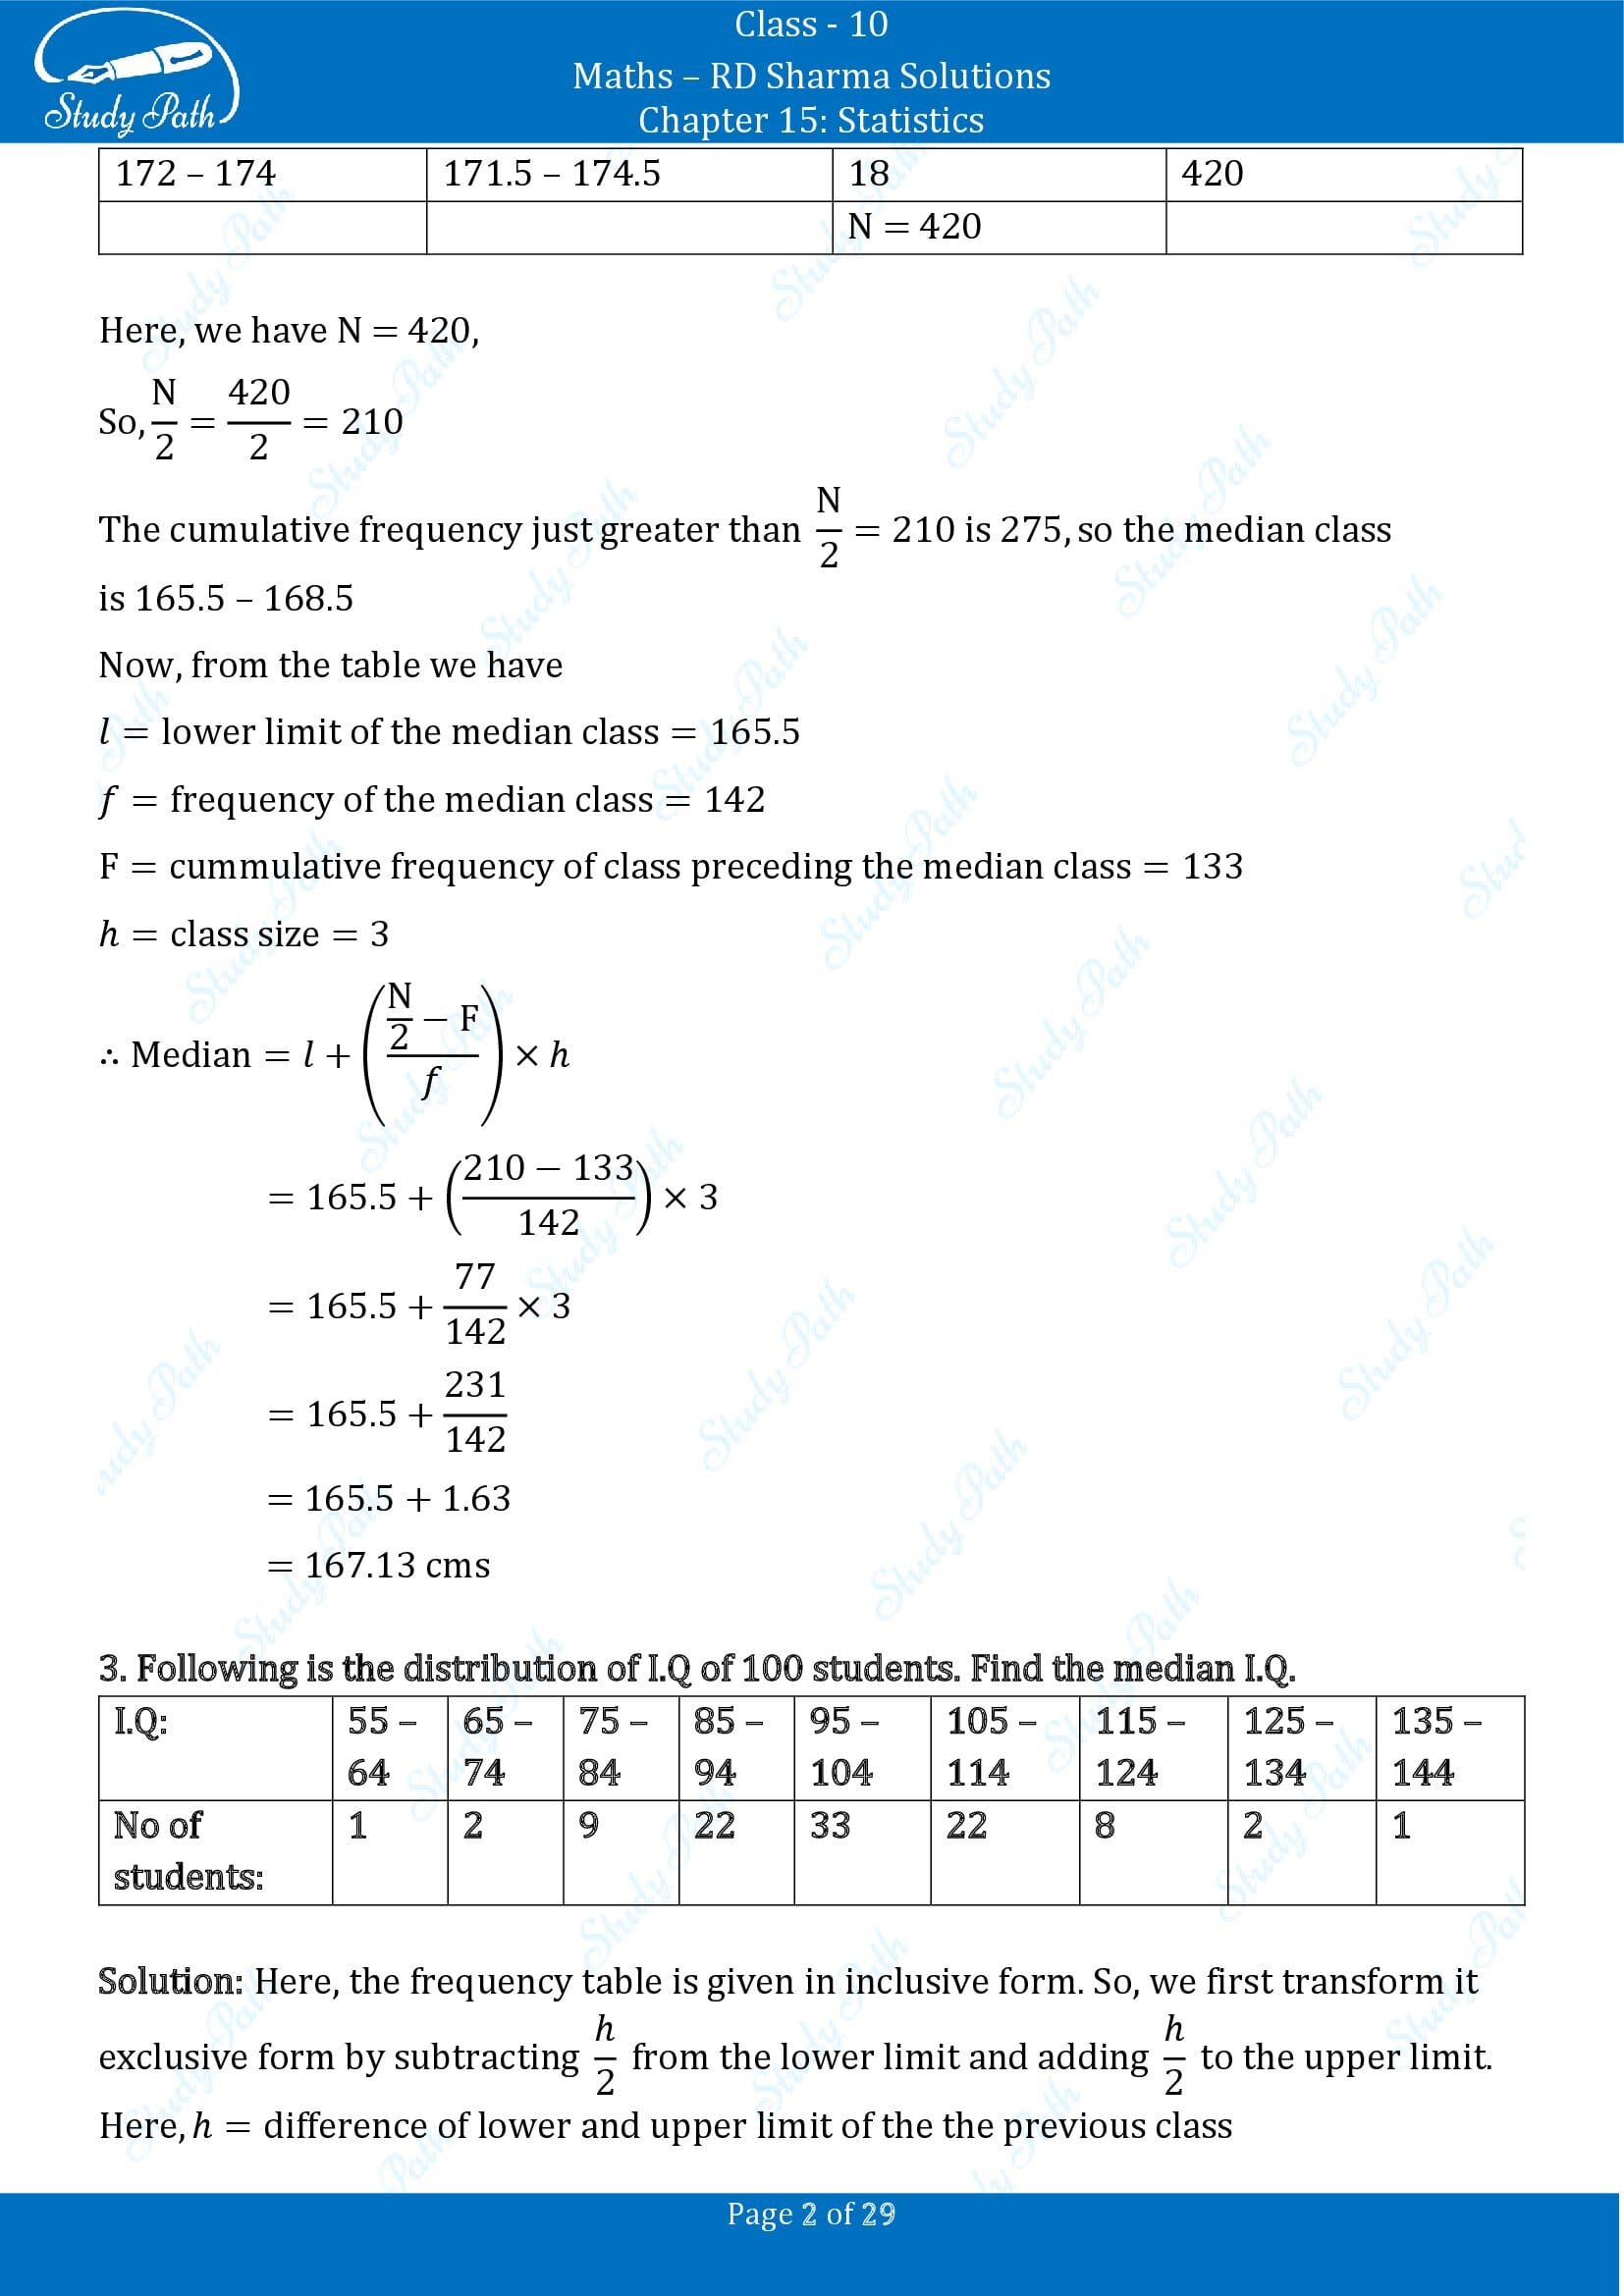 RD Sharma Solutions Class 10 Chapter 15 Statistics Exercise 15.4 00002